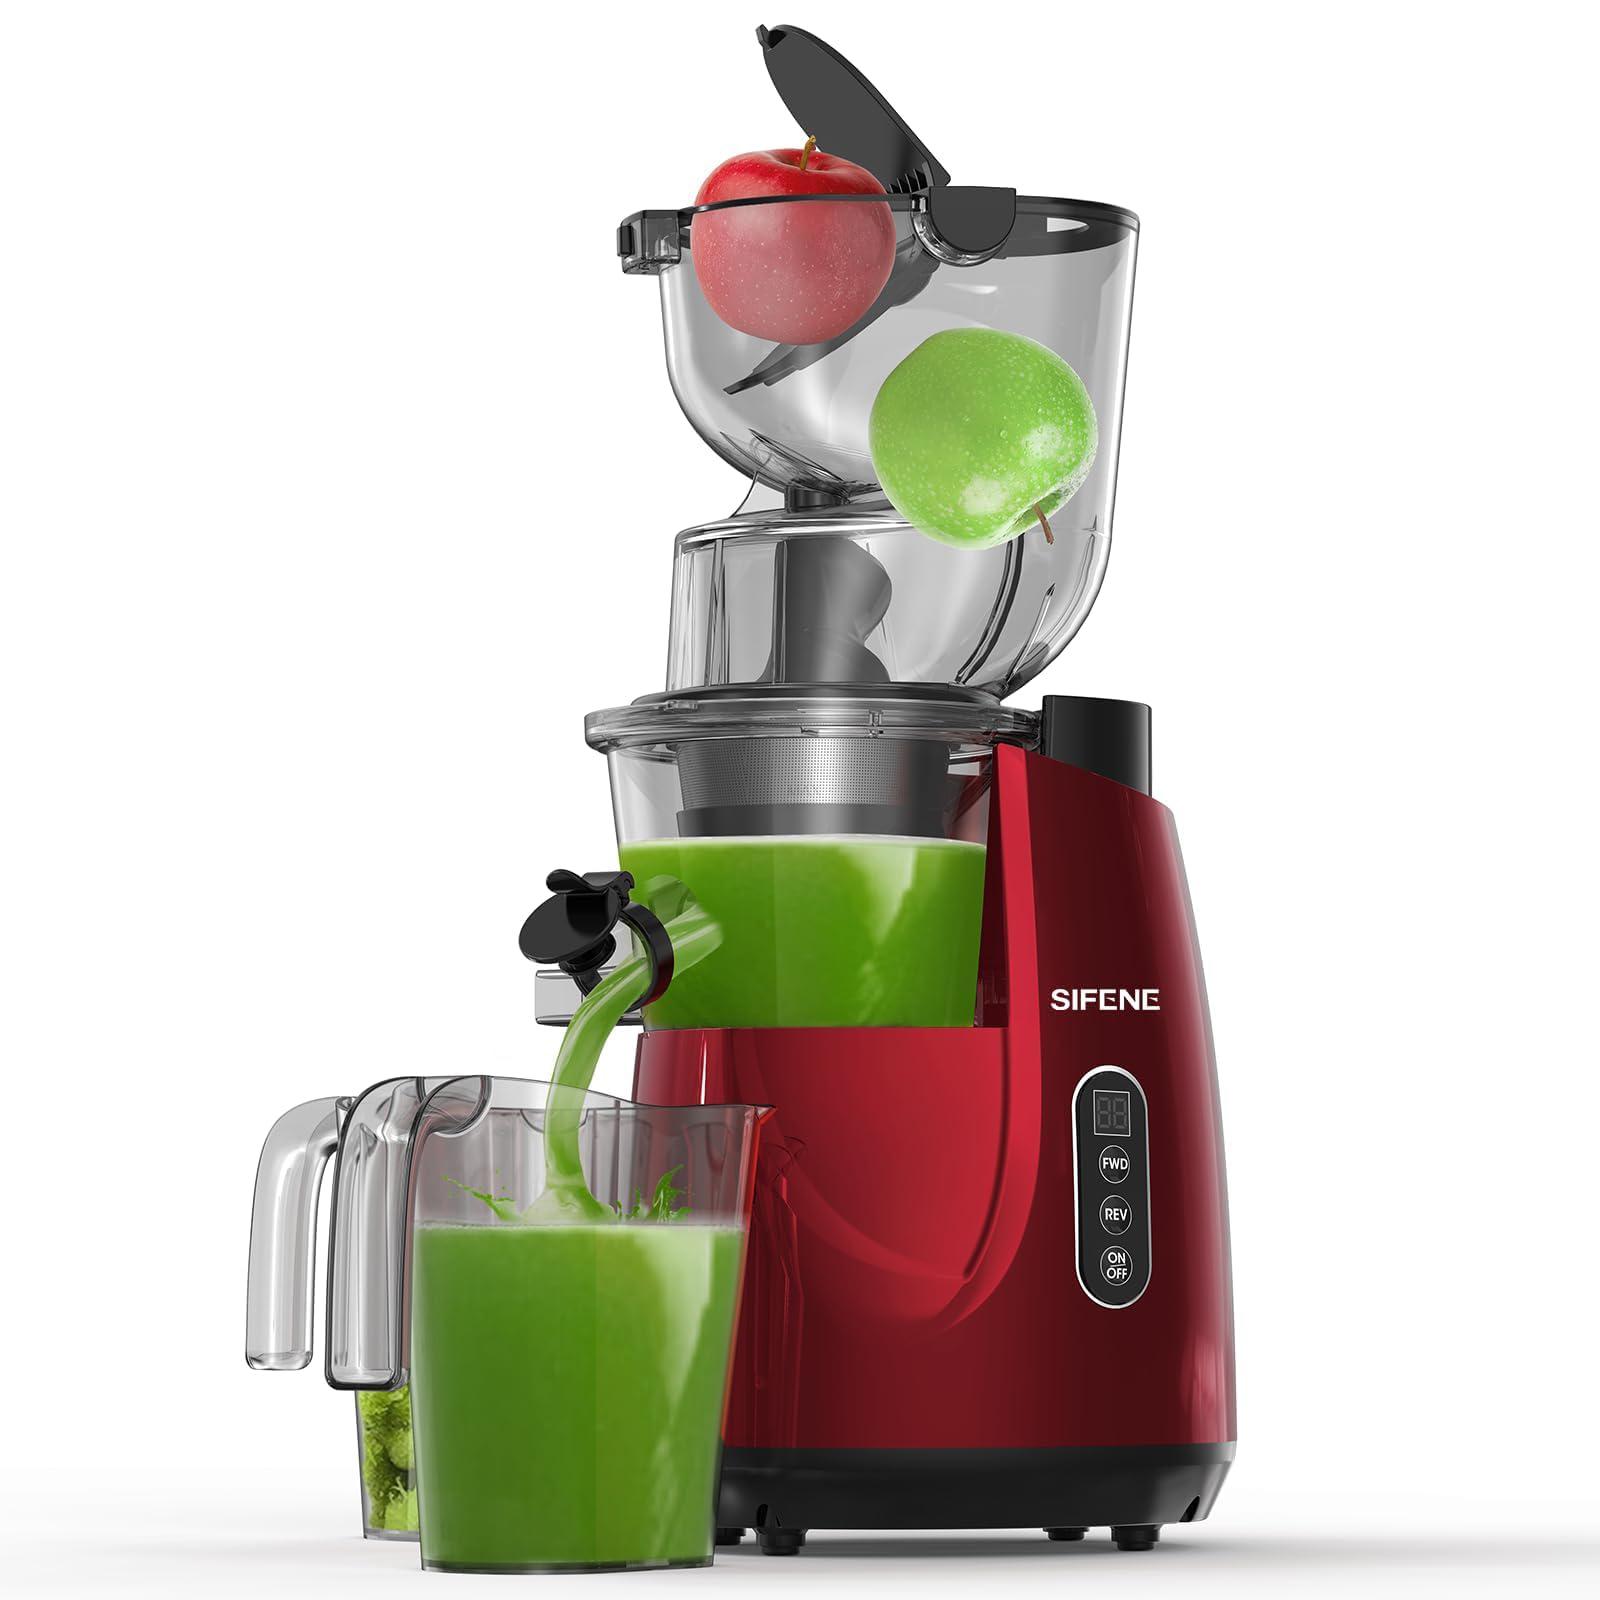 sifene cold press juicer machines with big 3.3 inch chute, slow juicer extractor maker for whole fruits and vegetables, bpa-f